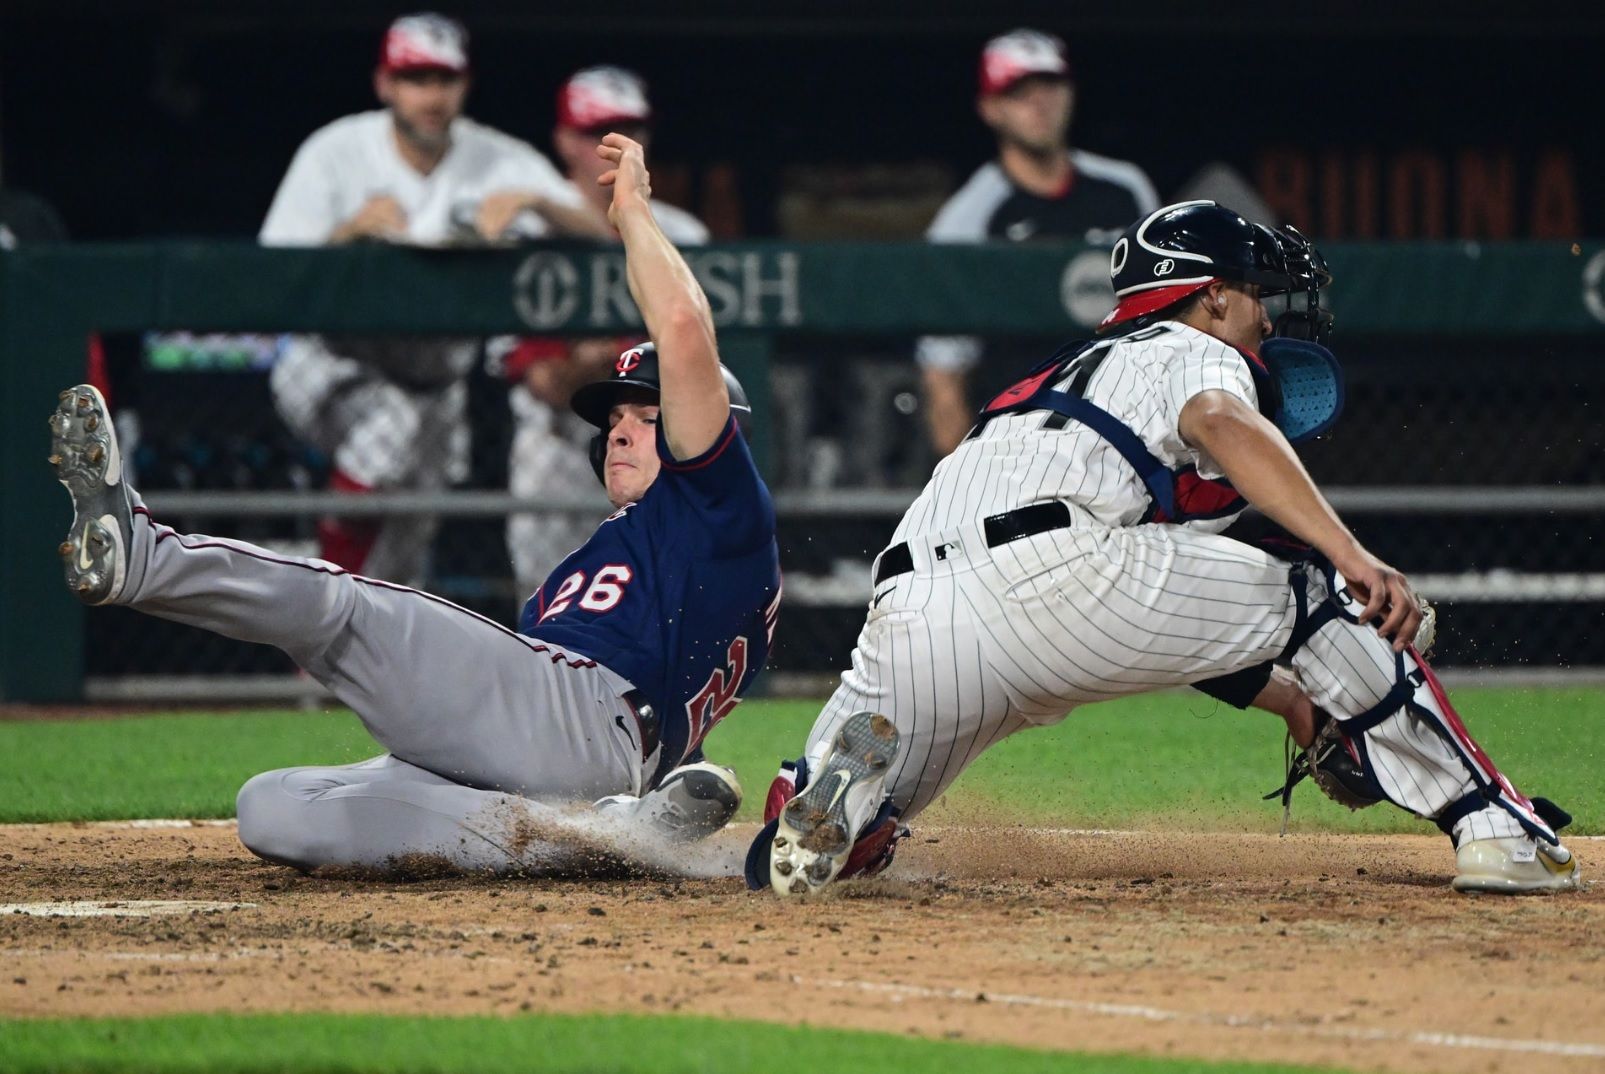 Arraez gets 3 hits as Twins beat White Sox 6-3 in 10 innings